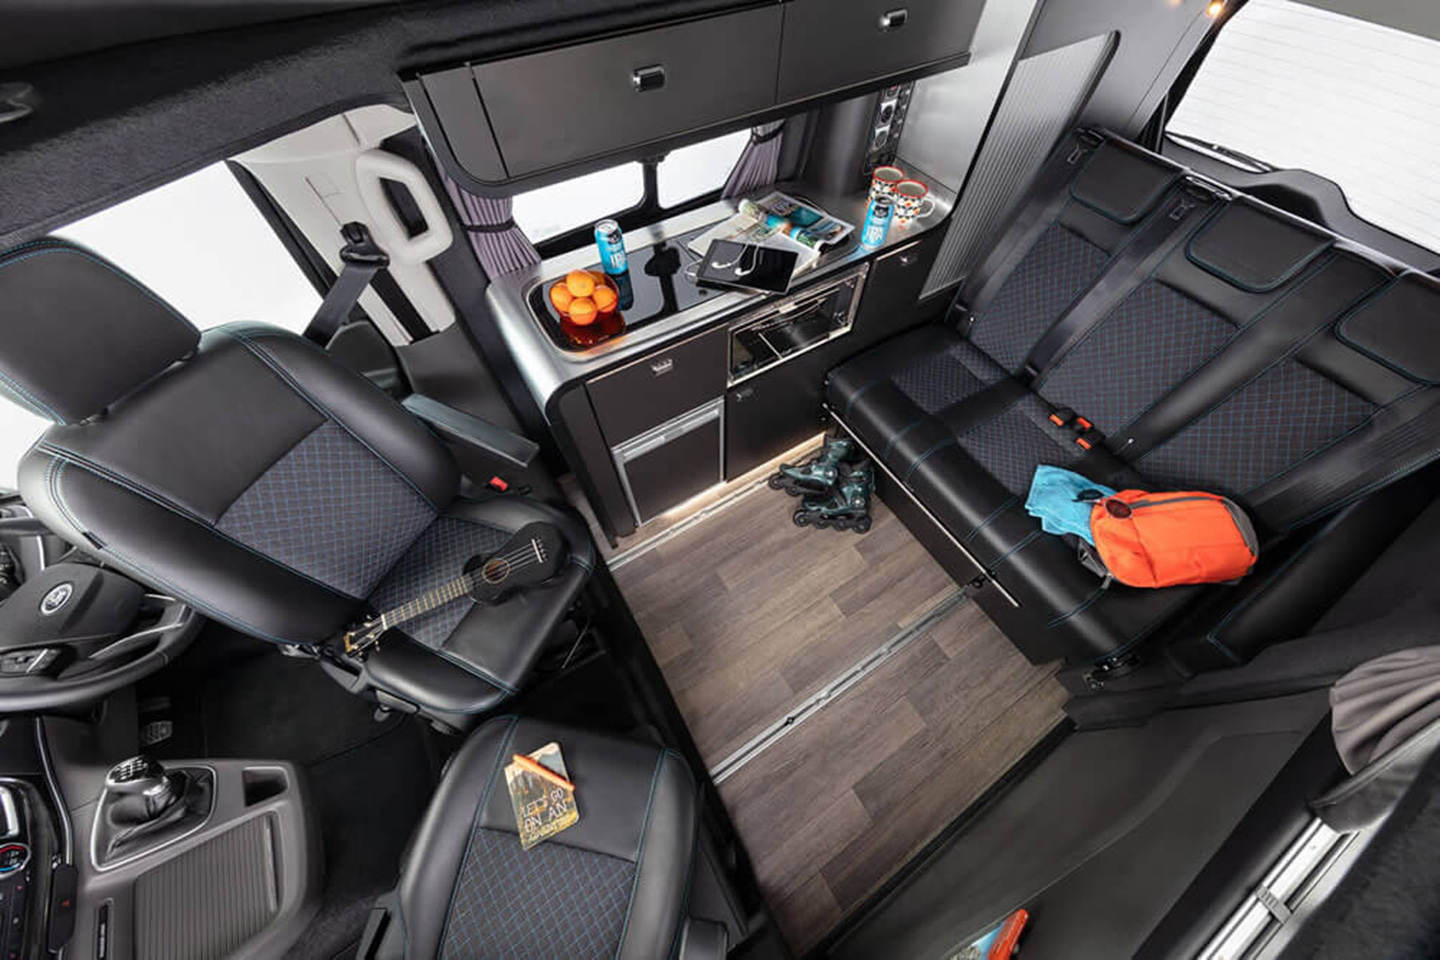 Once the cooking is done, the family can turn the car cabin into a dining room with an independent folding table, adjustable rear bench and swiveling front seats